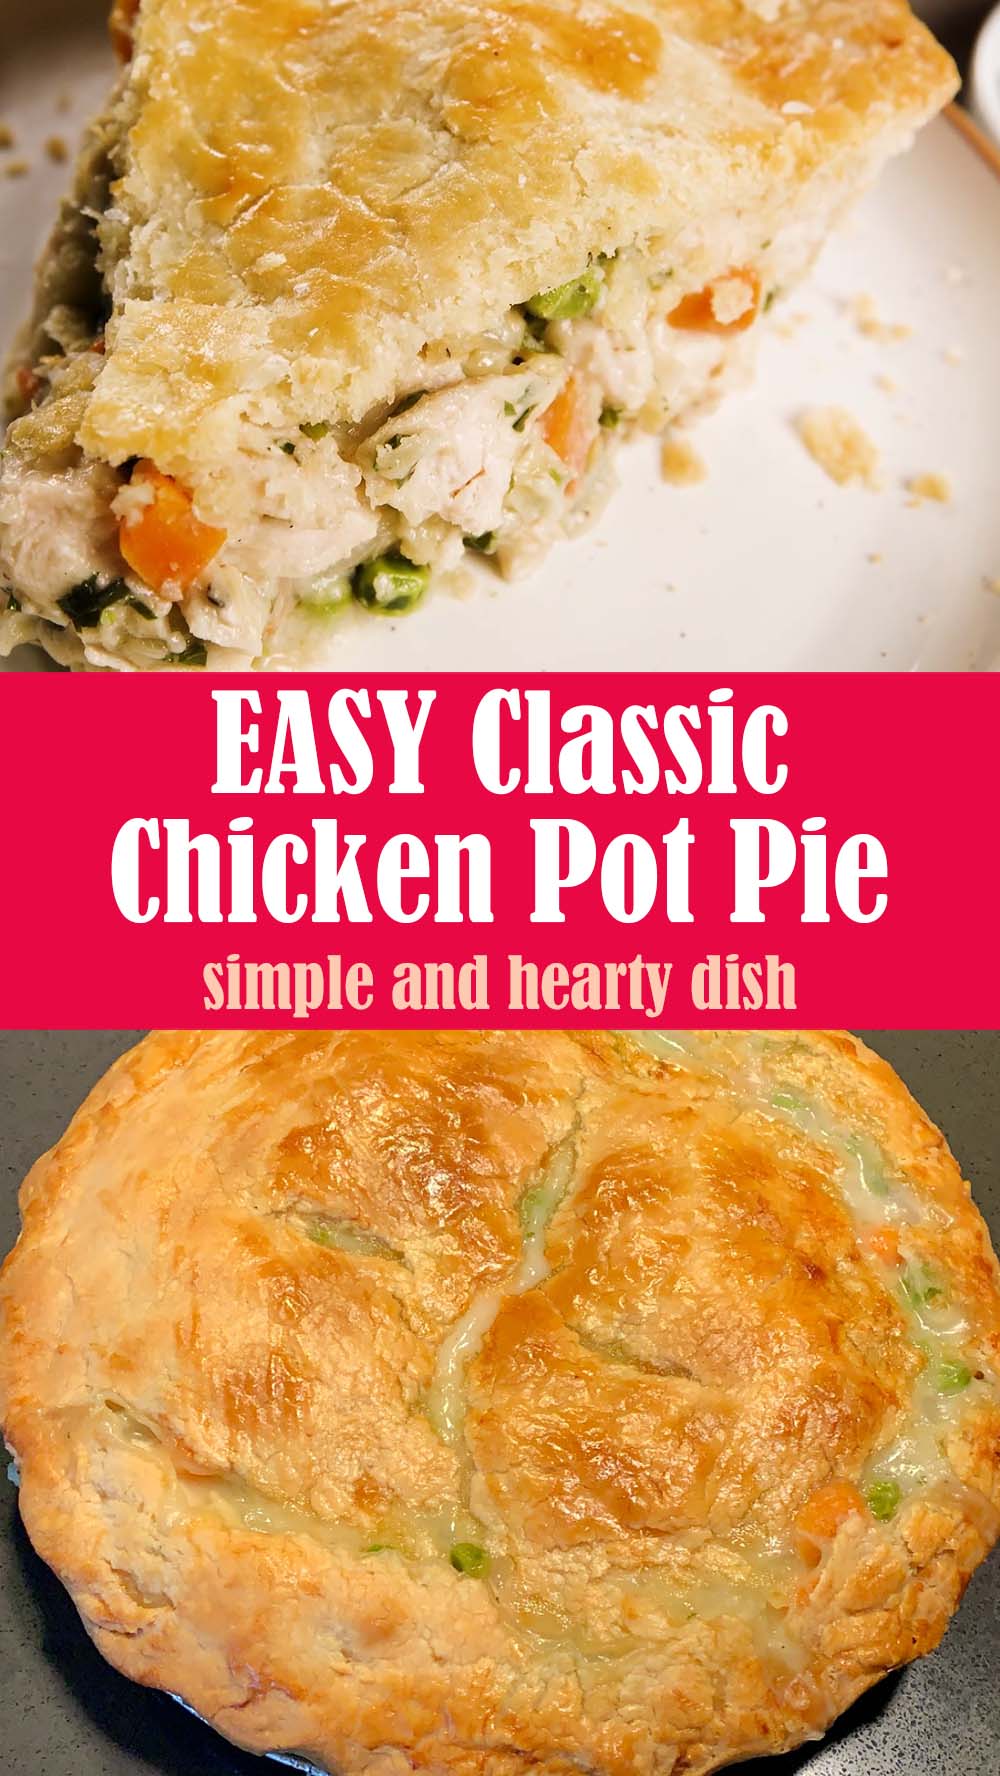 This Classic Chicken Pot Pie is the ultimate comfort food! Whether you make it for a comforting weeknight meal or enjoy it over dinner with friends or family, this simple and hearty dish is always welcomed!